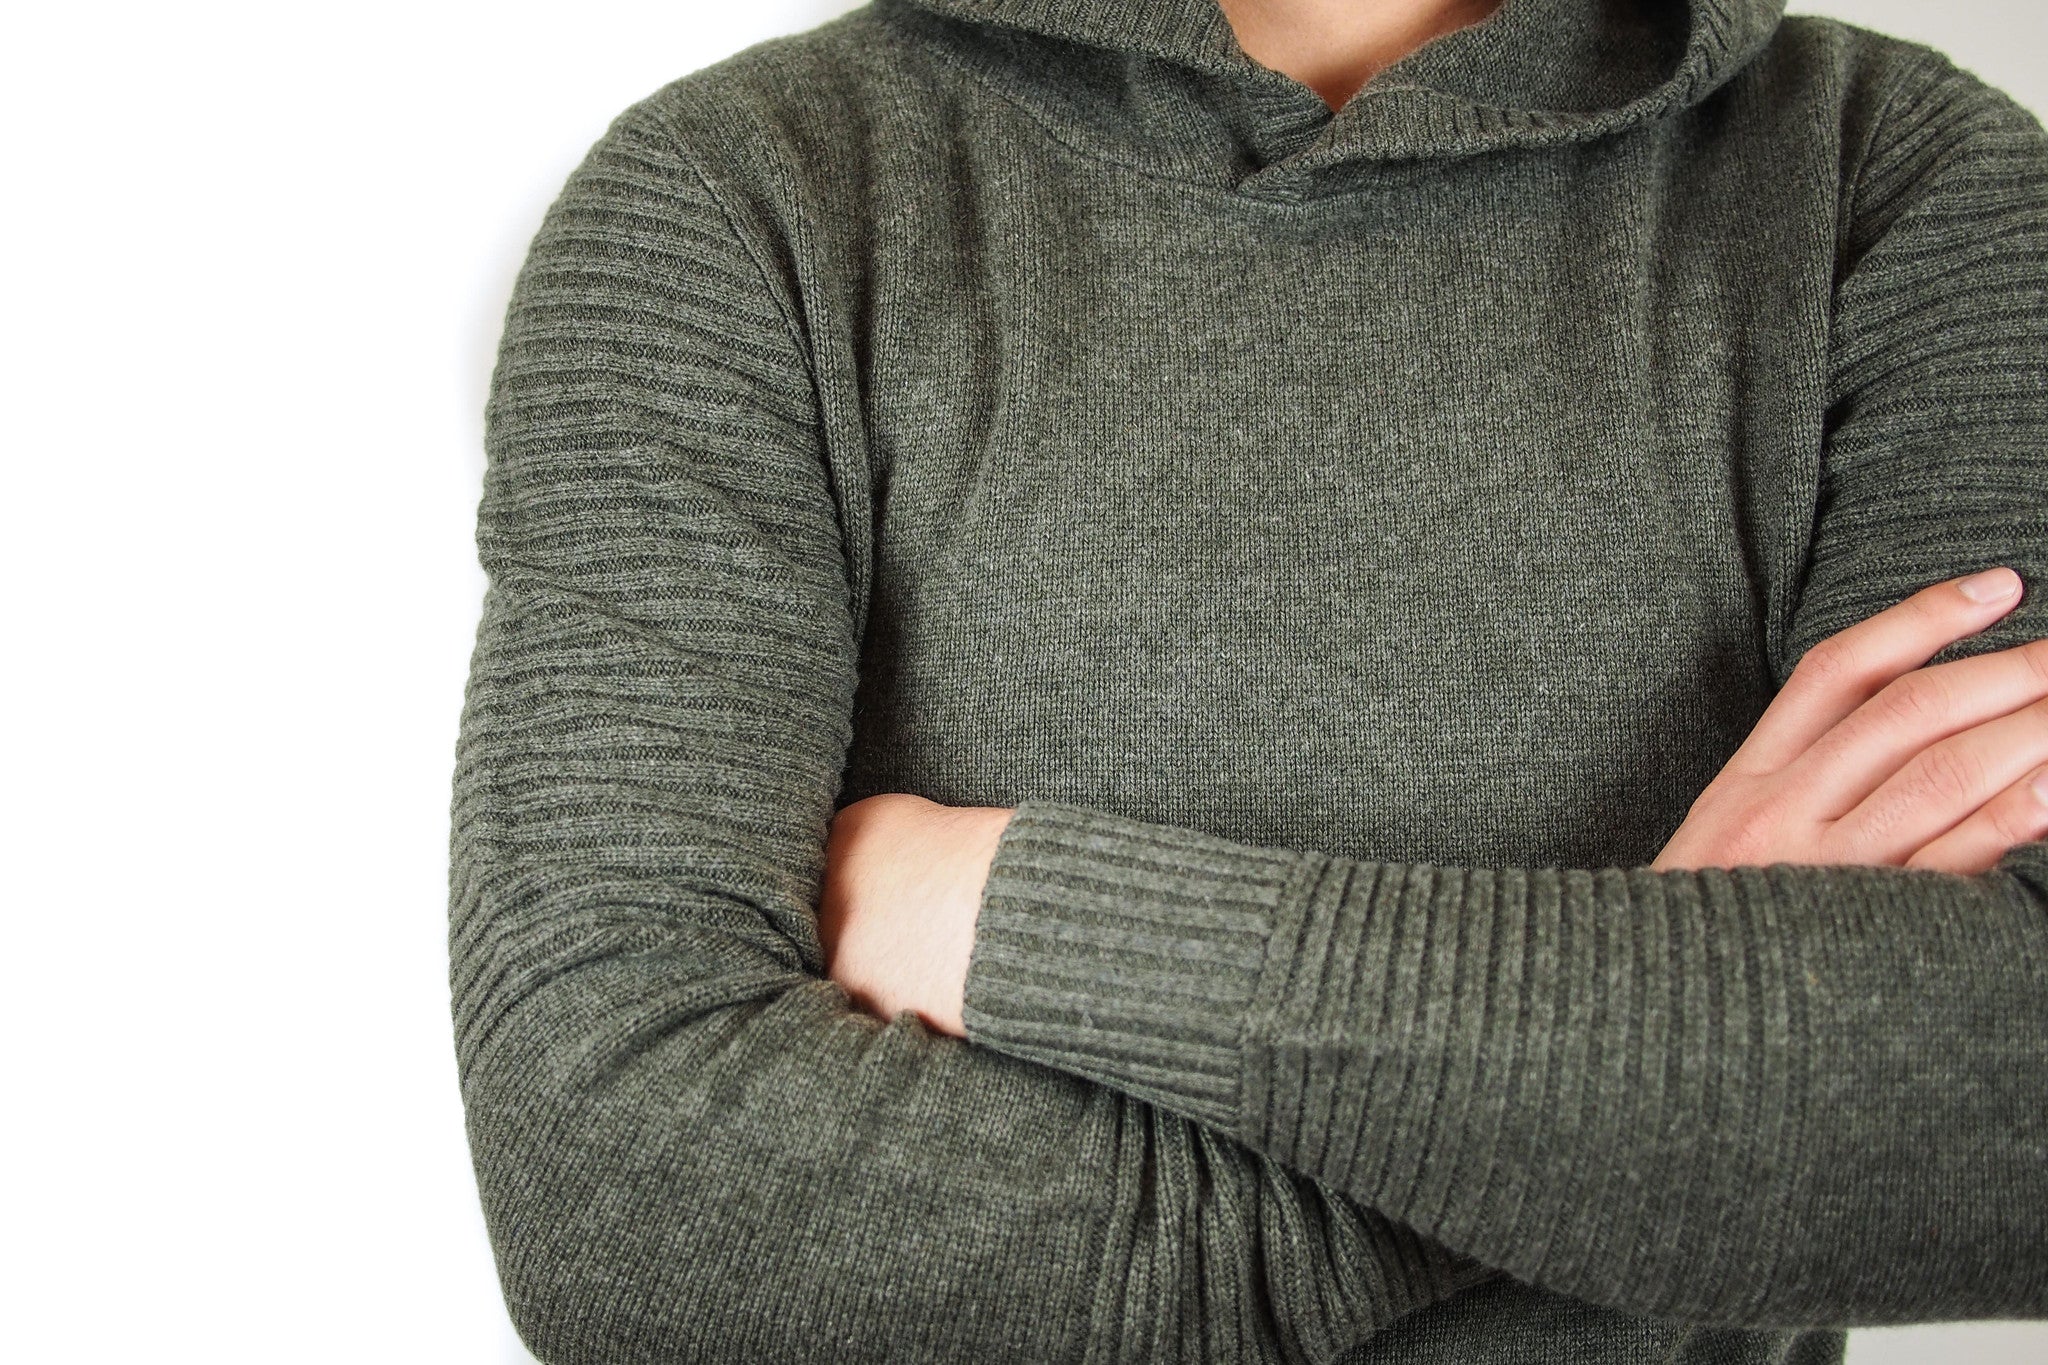 GENTLY USED Men's Cashmere Pullover Hoodie (Army Green)